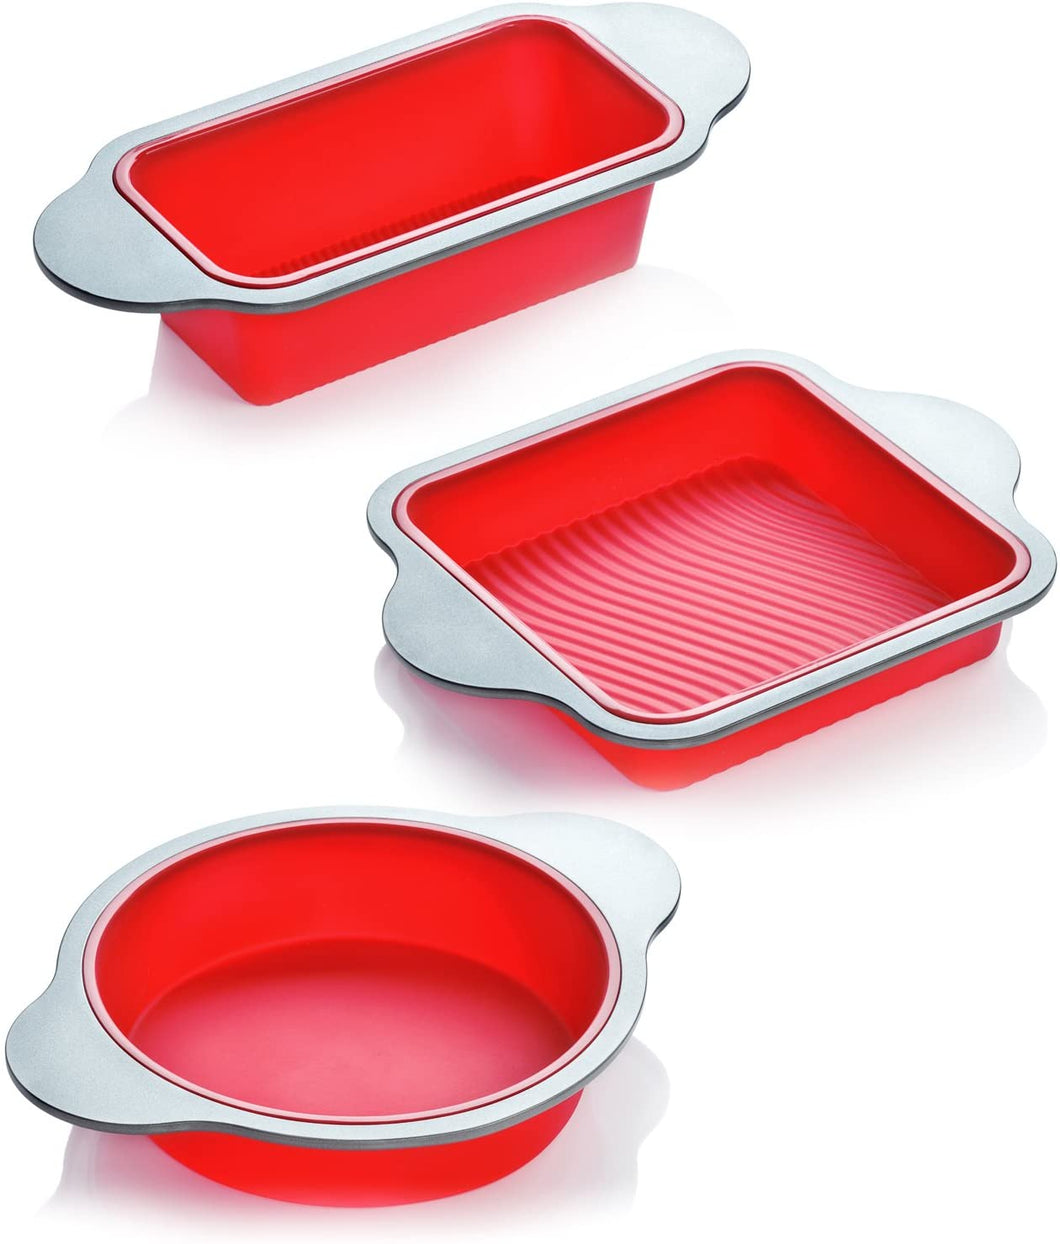 Silicone Baking Pans Set. 3 PCS Professional Silicone Non-Stick Baking Cake Pans Set by Boxiki Kitchen. Includes Silicone Round Cake Pan, Square Cake Pan and Bread Loaf Pan.